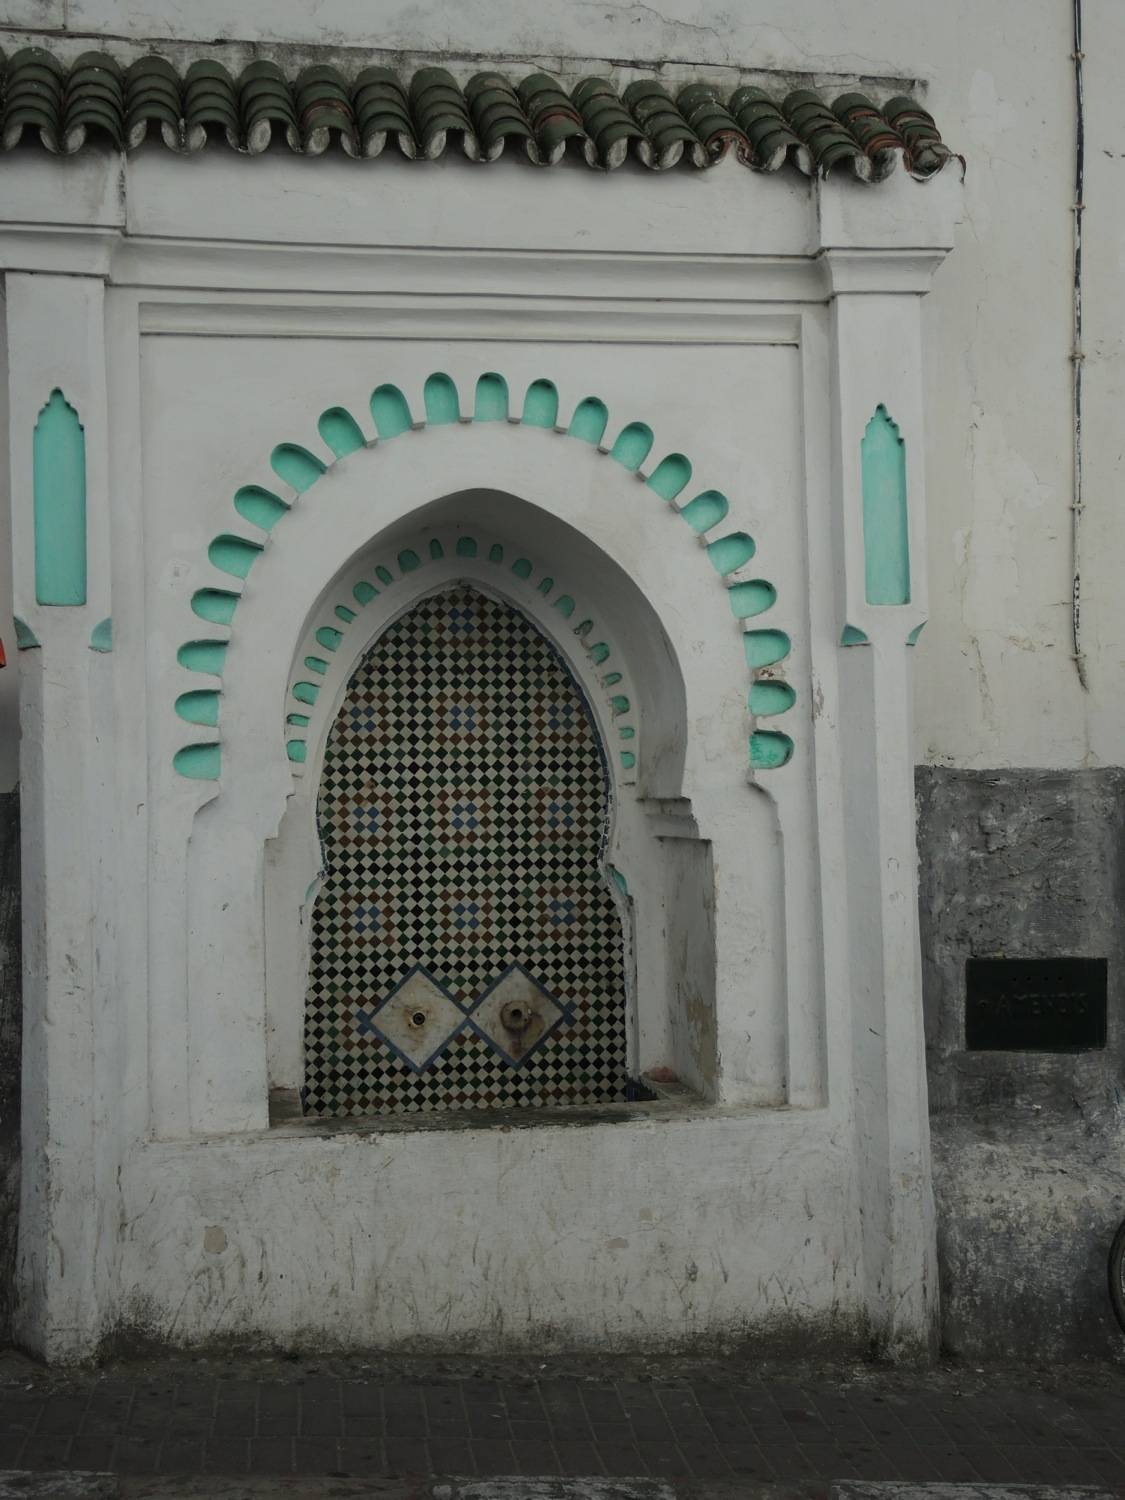 View of the fountain on the wall between the school and bathrooms, across the street from the mosque